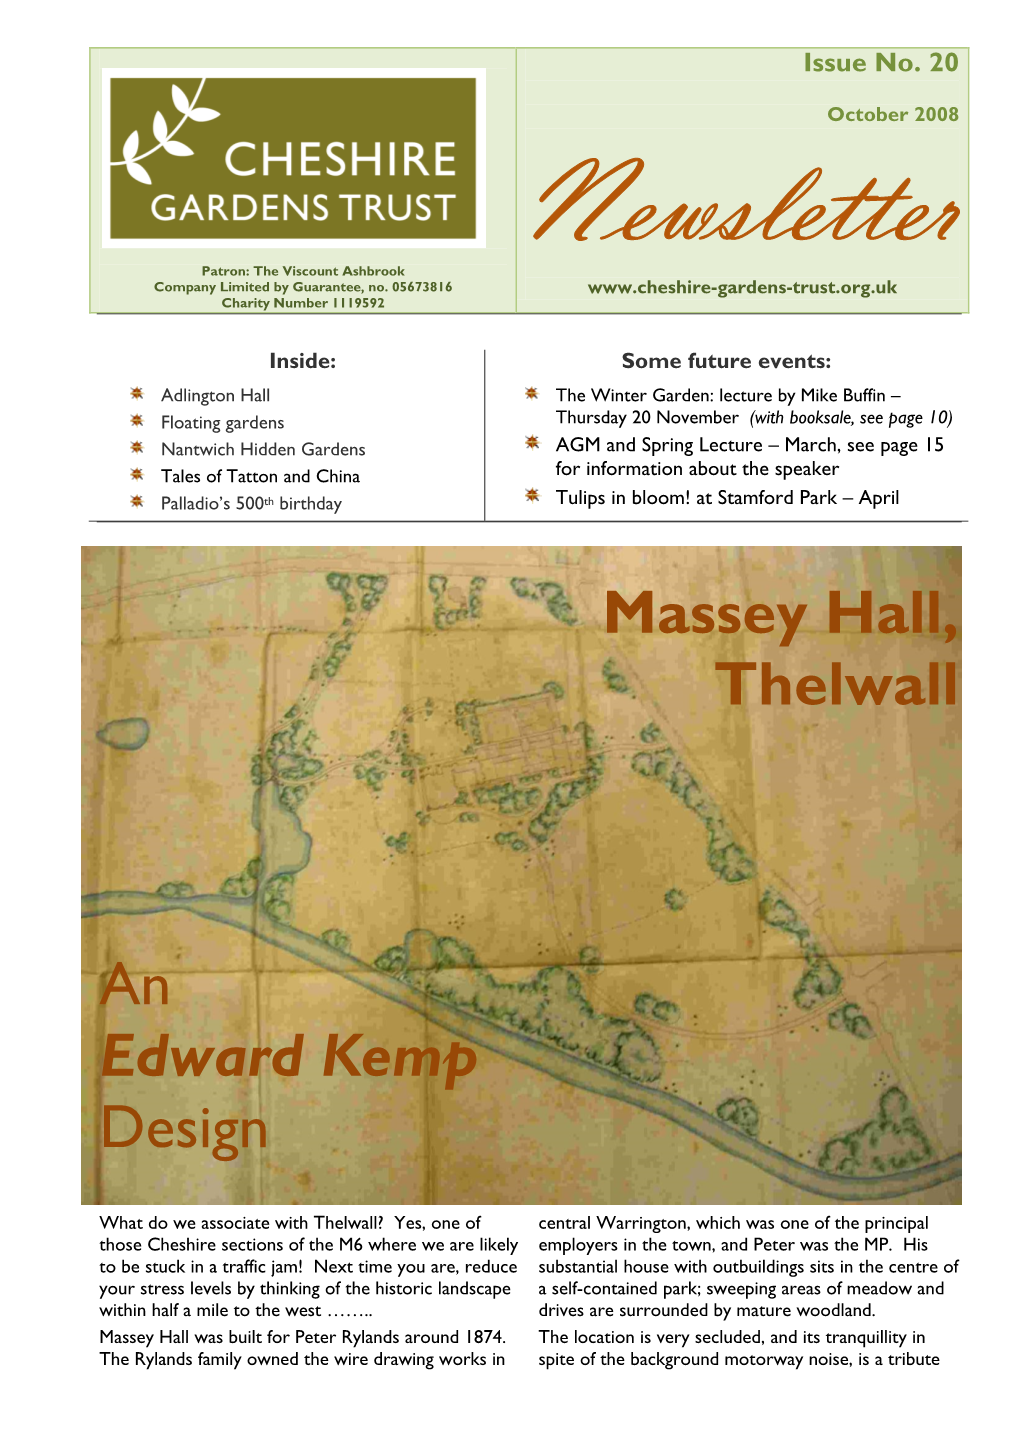 Massey Hall, Thelwall